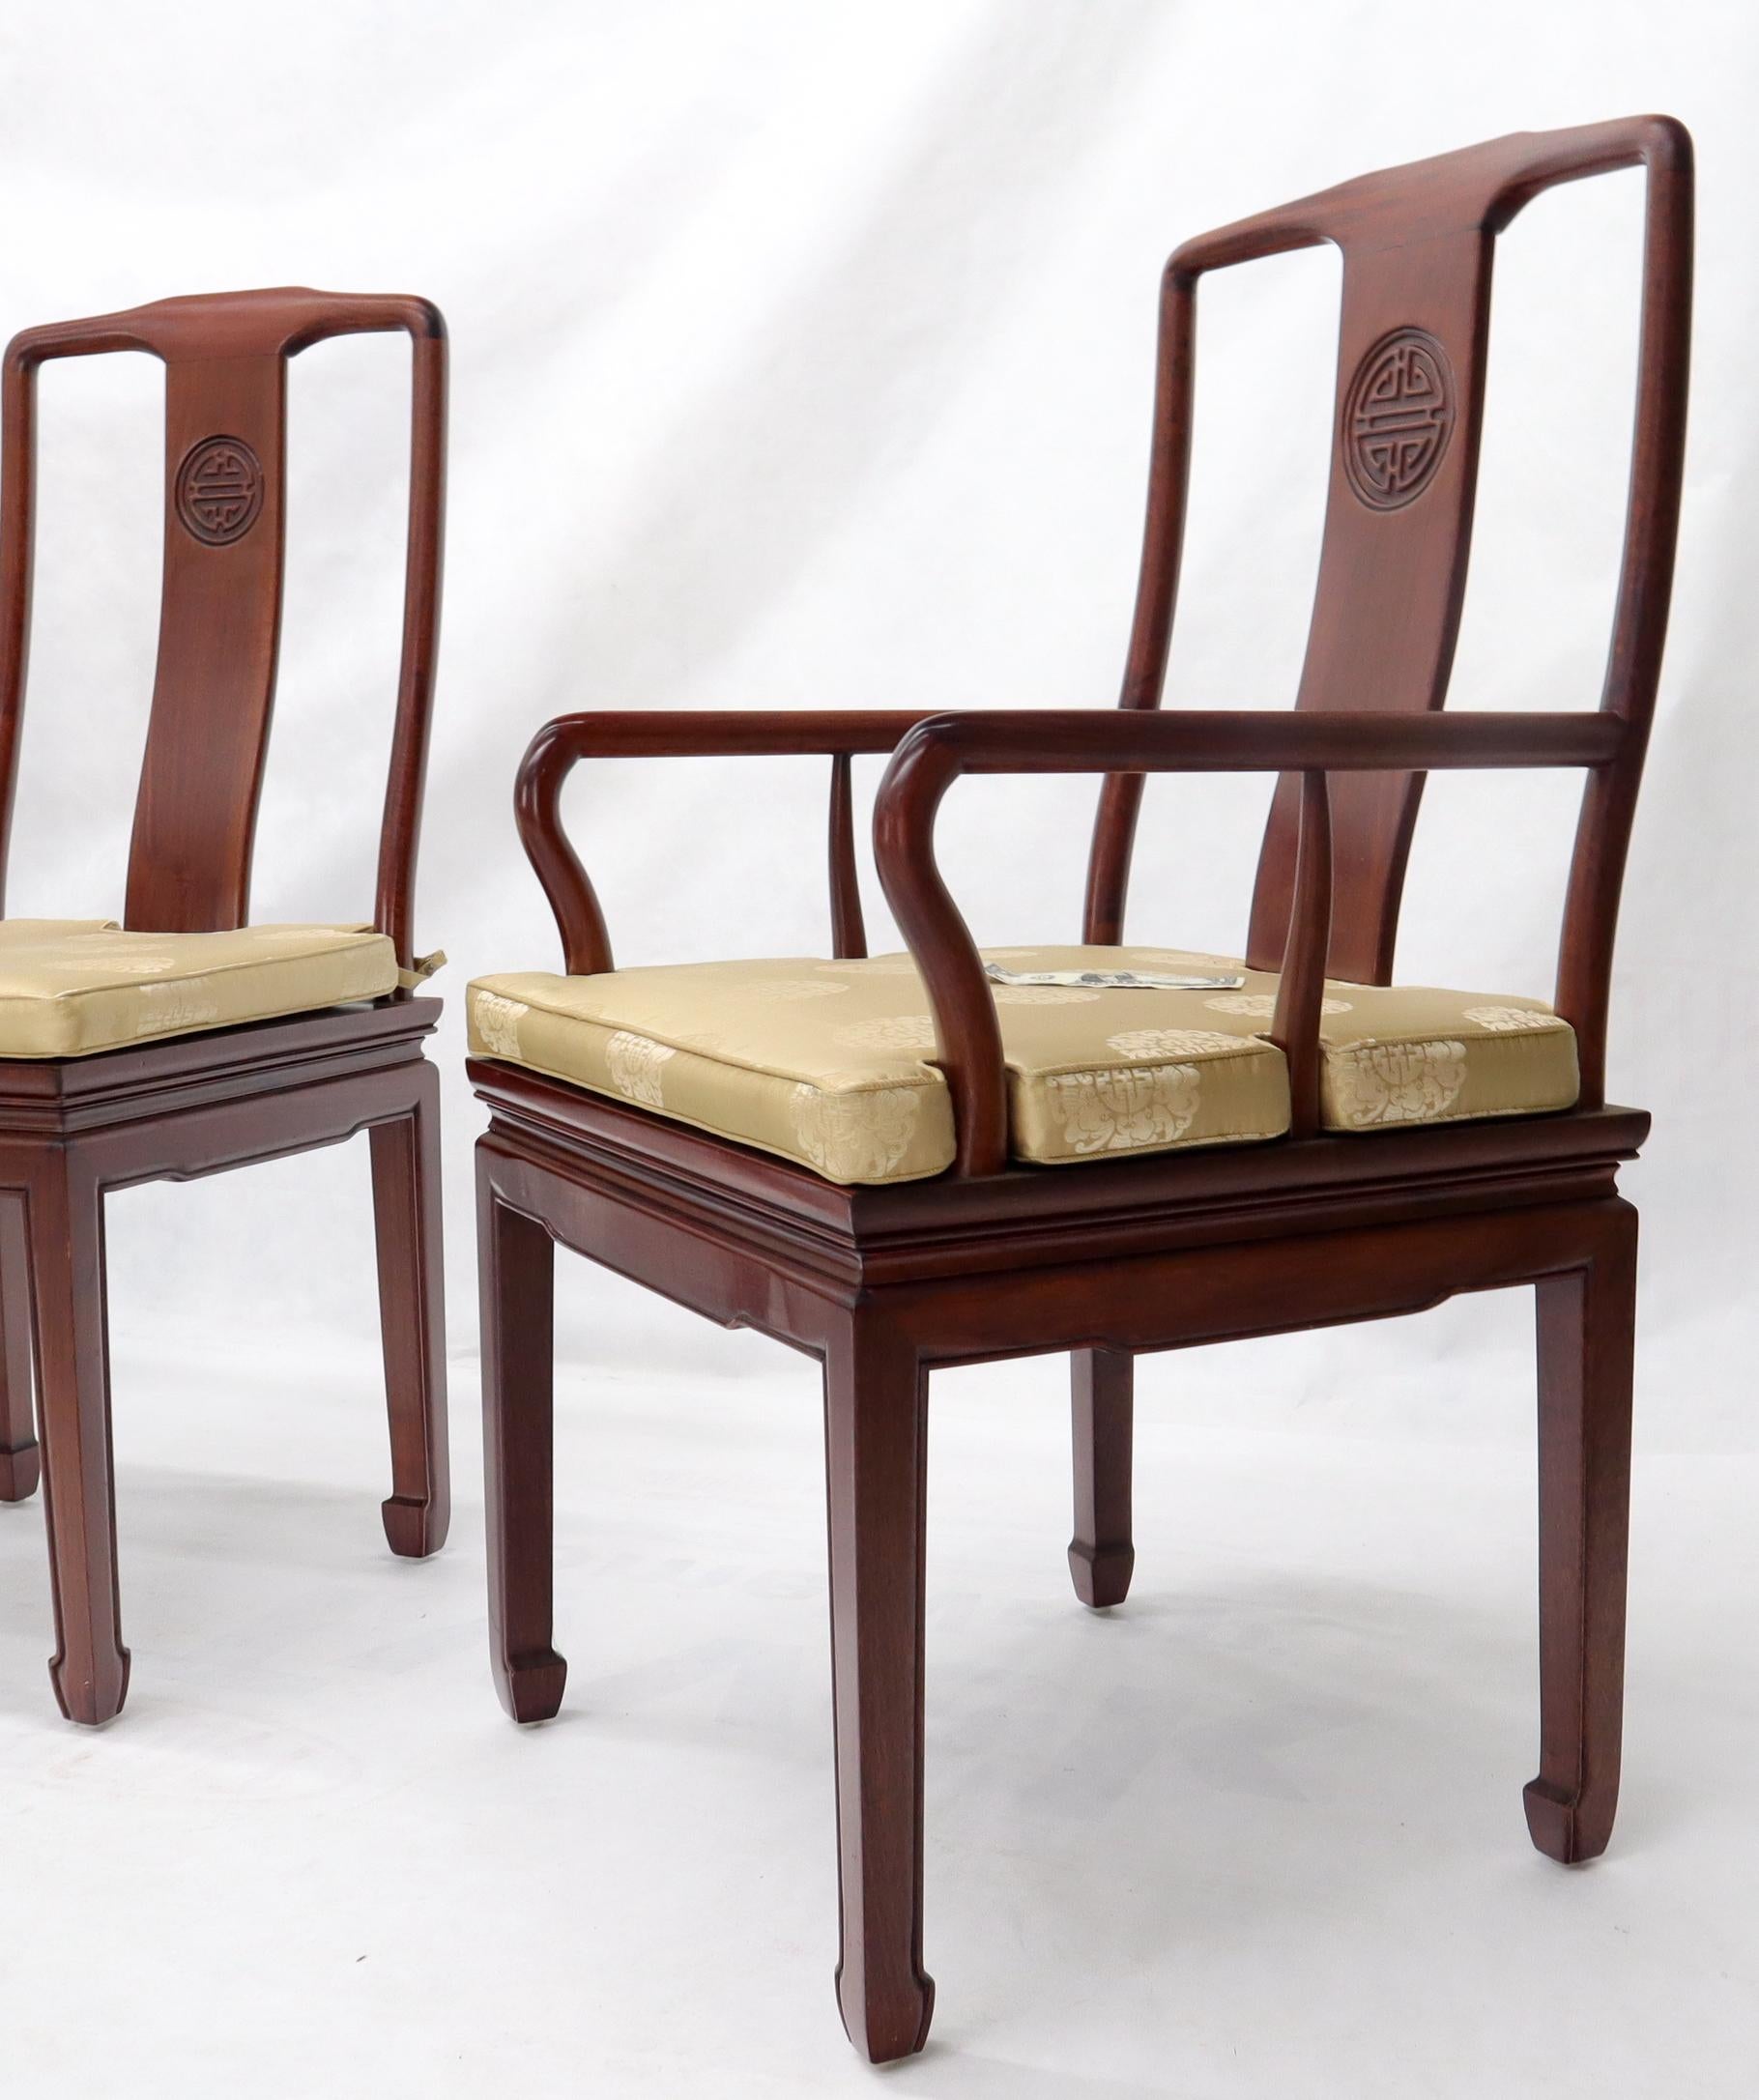 Set of 8 Solid Rosewood High Quality Chinese Asian Dining Room Chairs For Sale 1